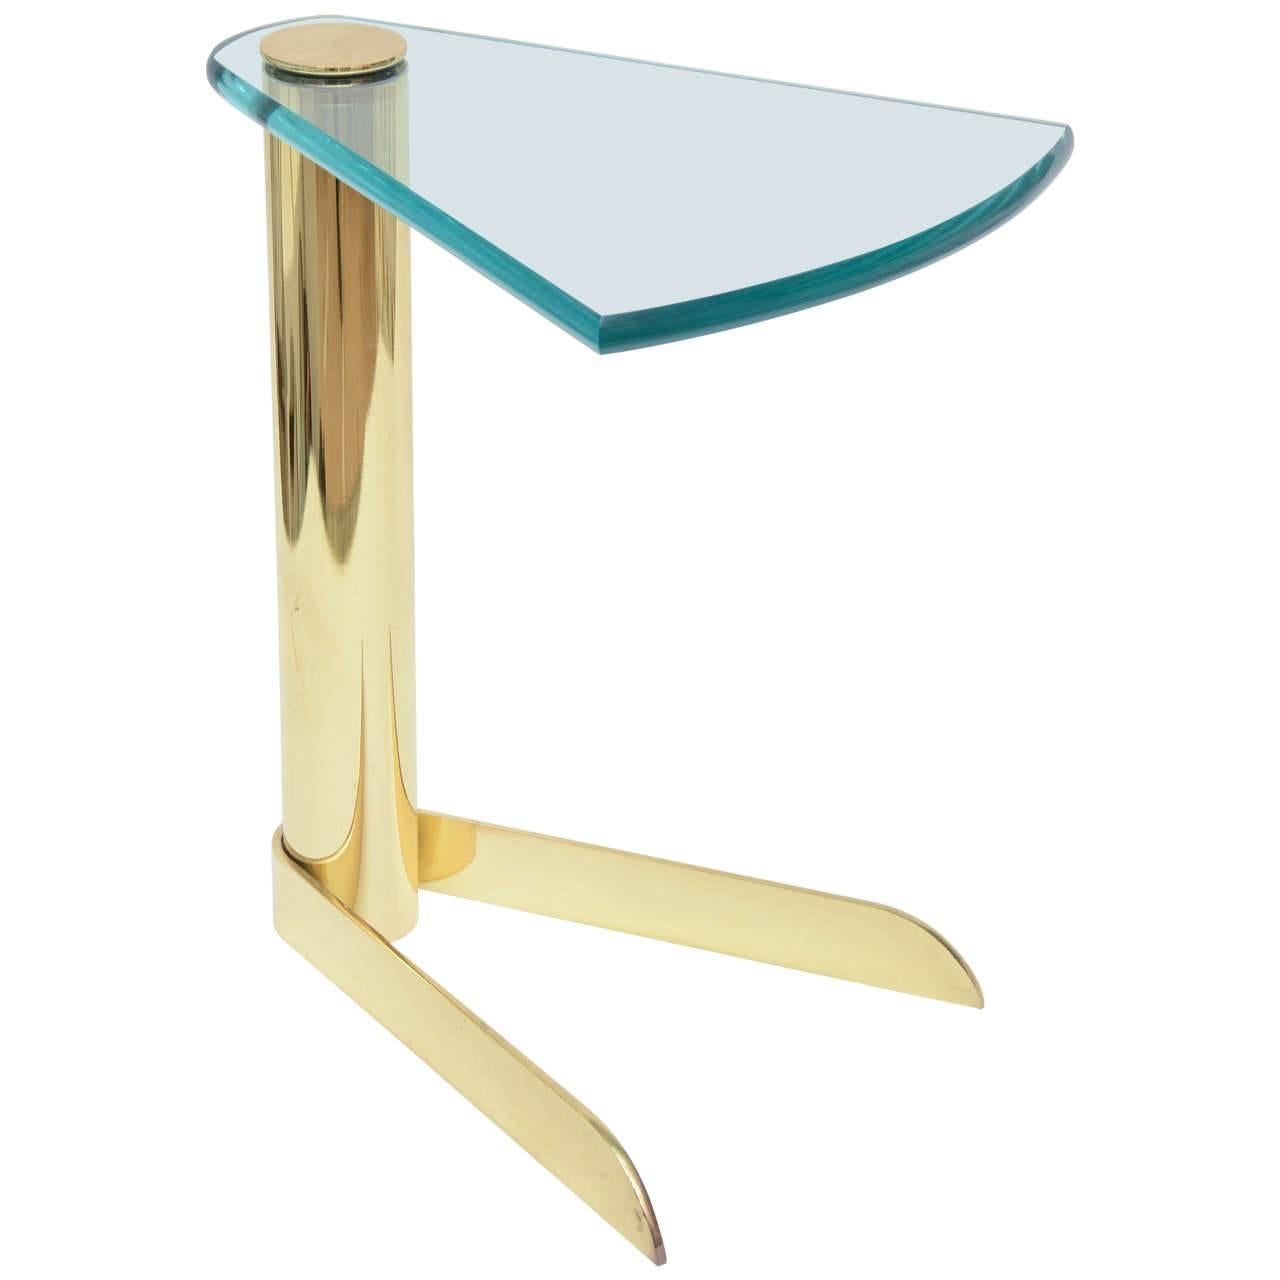 Hard to find pair of sculptural wedge shaped cigarette or drinks table has wonderful form and substance. The polished green edged glass is 1/2 inch thick, and cantilevers over the columned body and pie-shaped patinated brass base.
Can be polished